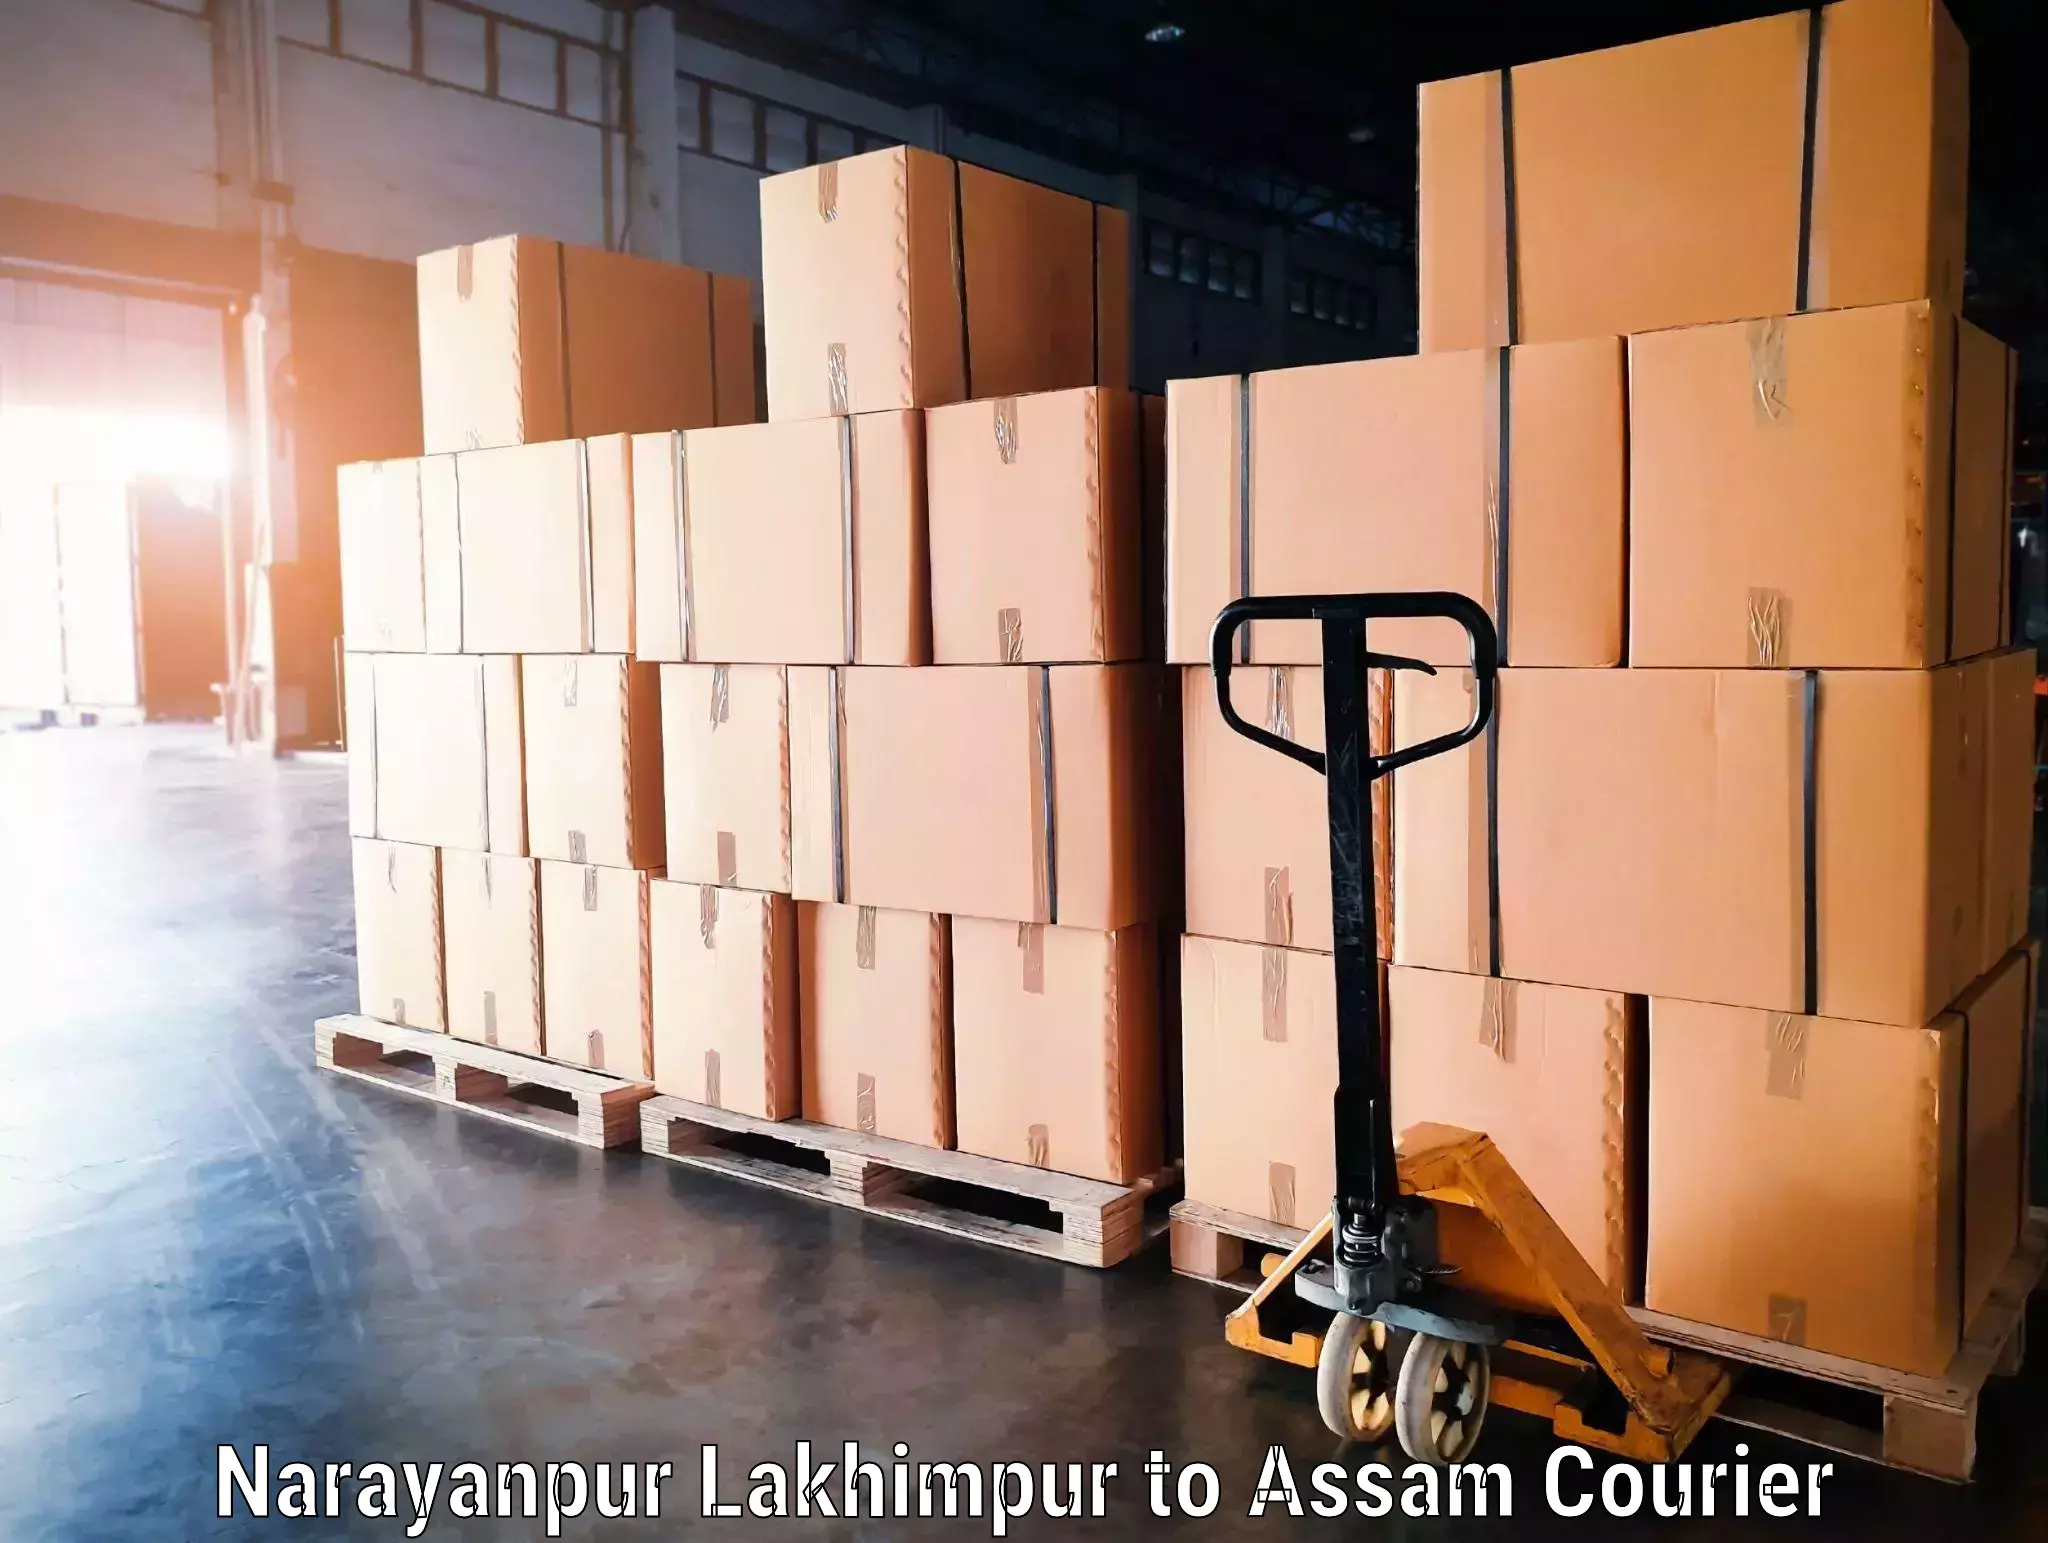 Luggage shipment specialists Narayanpur Lakhimpur to Assam